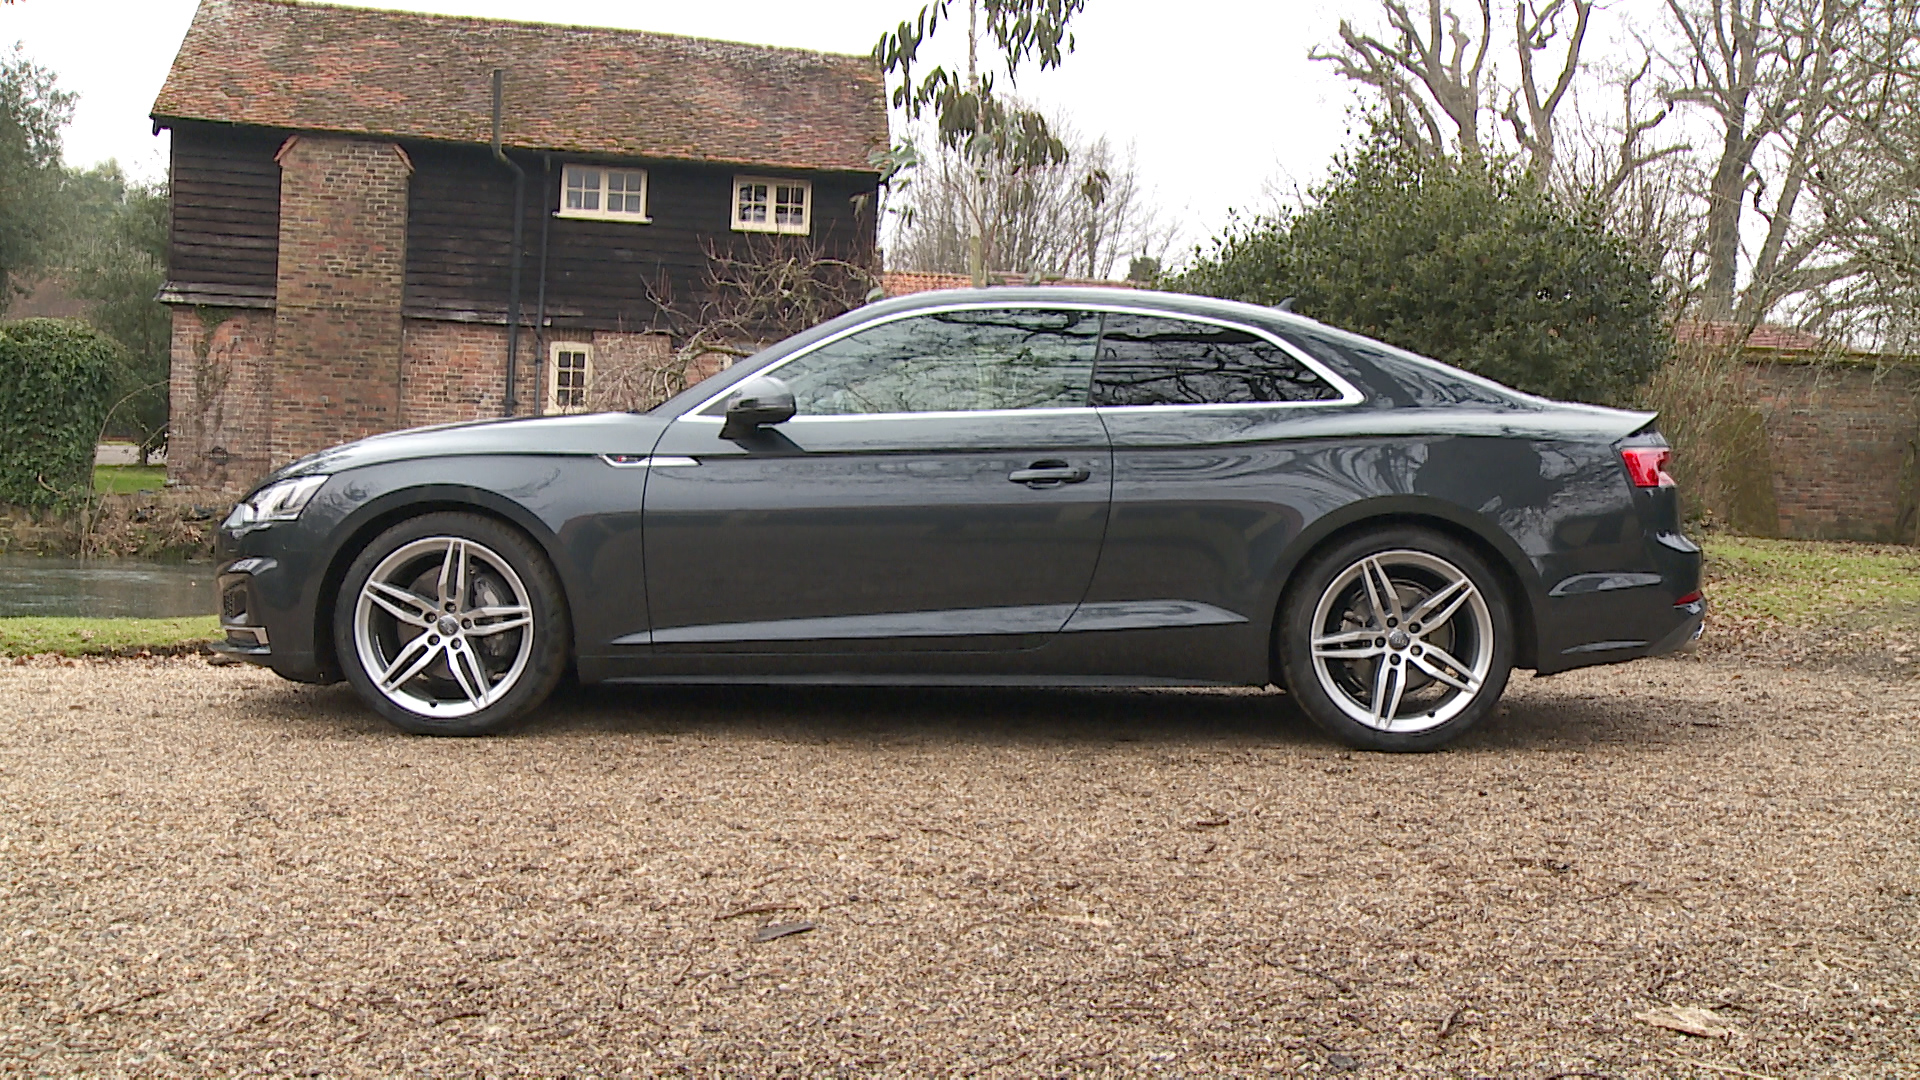 Audi A5 Sportback Puts The Convenience In Coupe